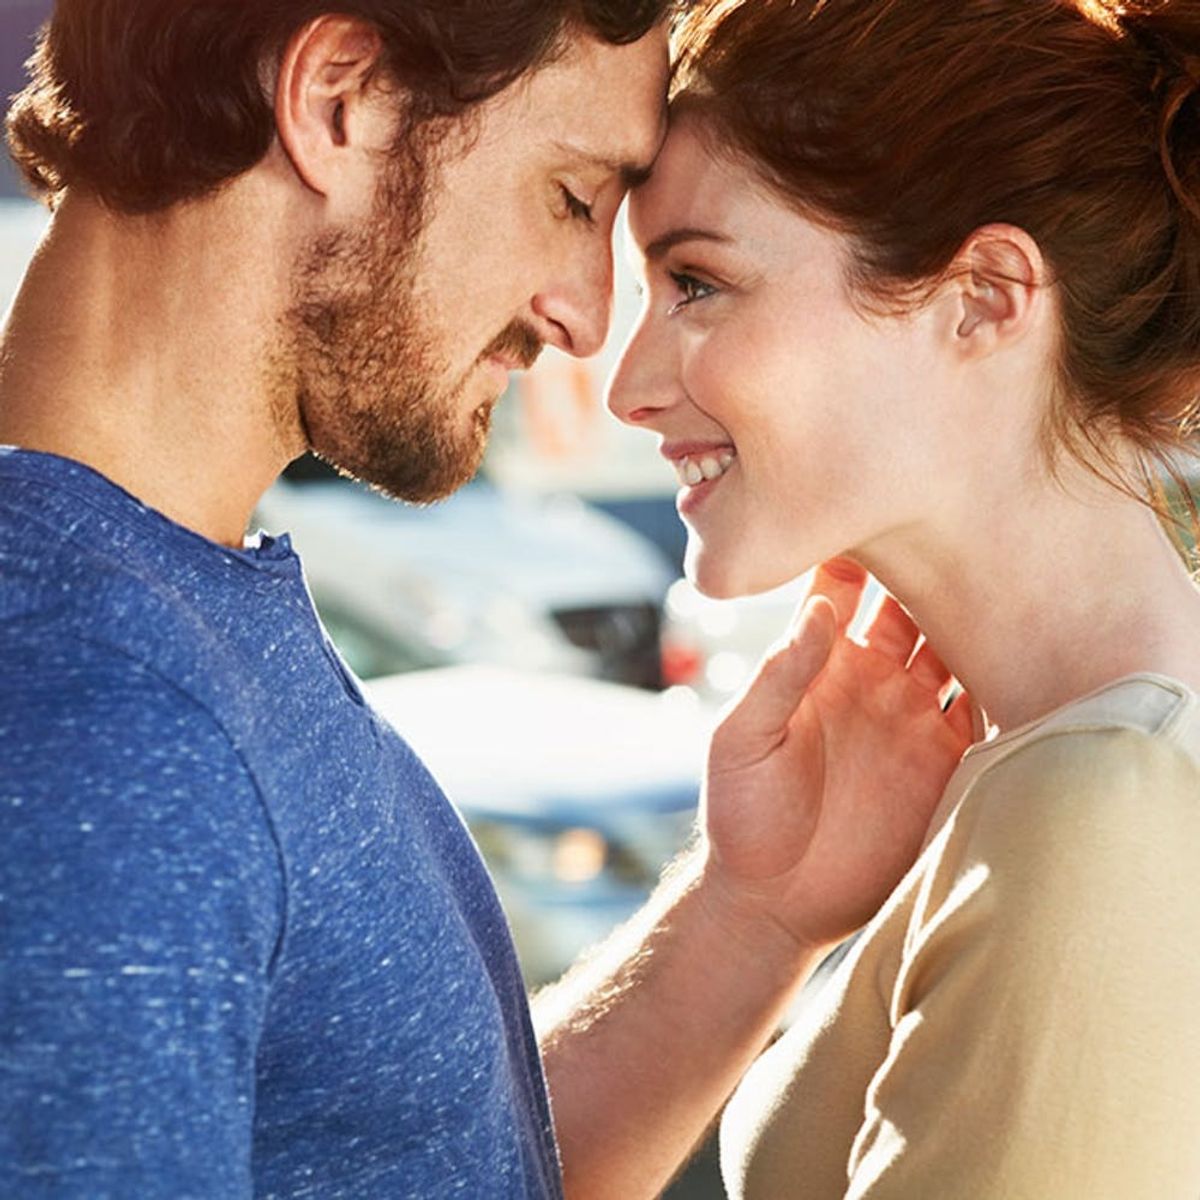 Why Feeling Butterflies in Your Stomach Is Less Romantic Than You Think